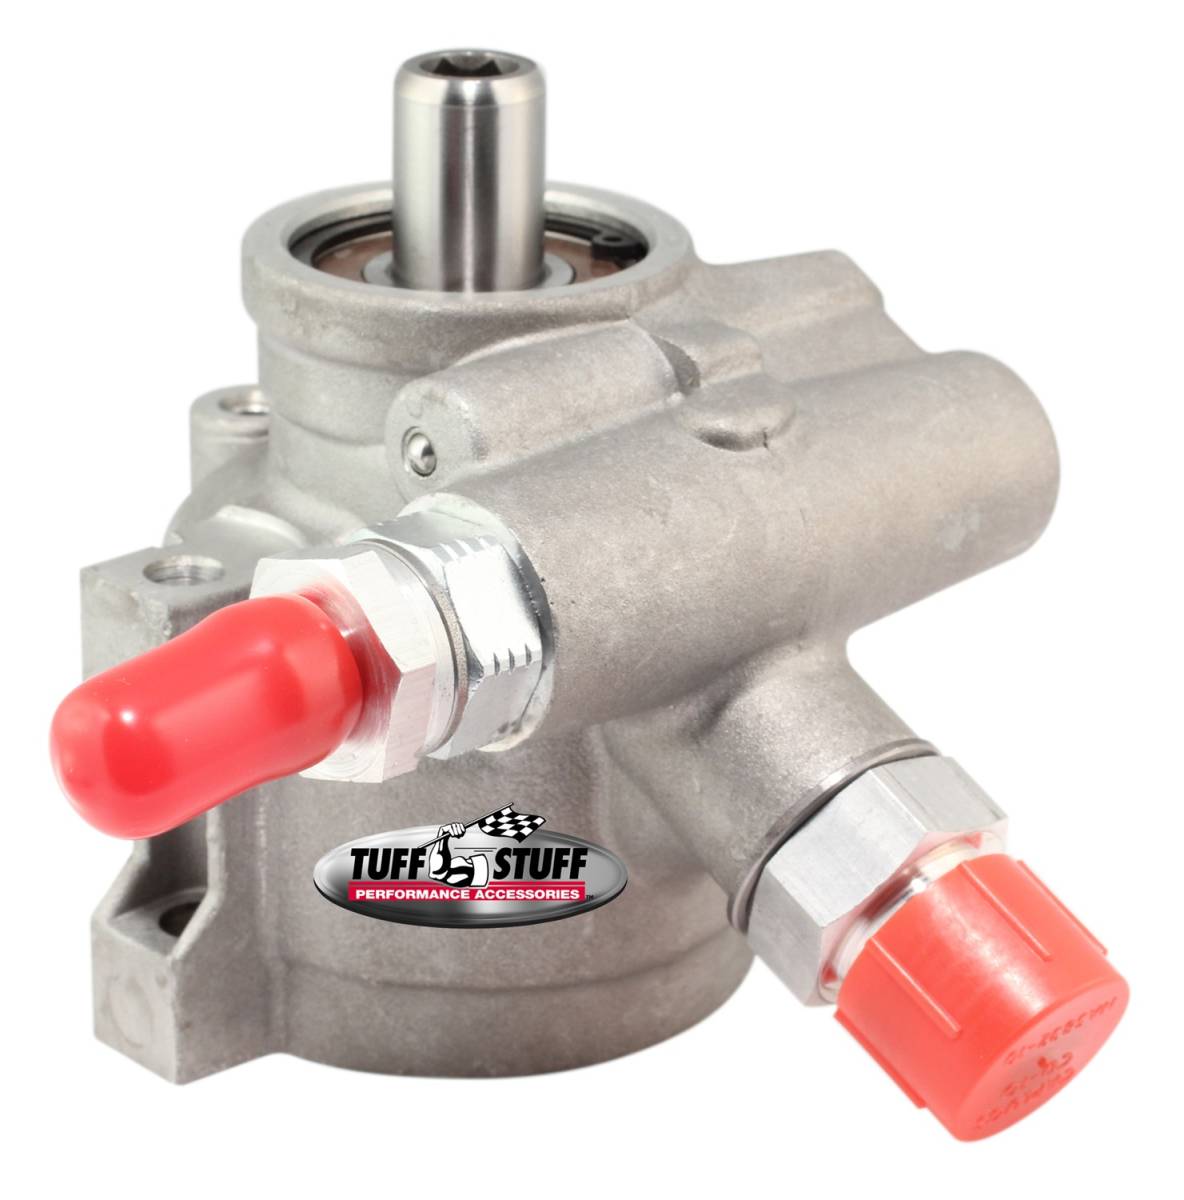 Tuff Stuff Performance - Type II Alum. Power Steering Pump AN-6 And AN-10 Fitting M8x1.25 Threaded Hole Mtg Btm Pressure Port For StreetRods/Custom Vehicles w/Limited Engine Space Factory Cast PLUS+ 6170AL-2